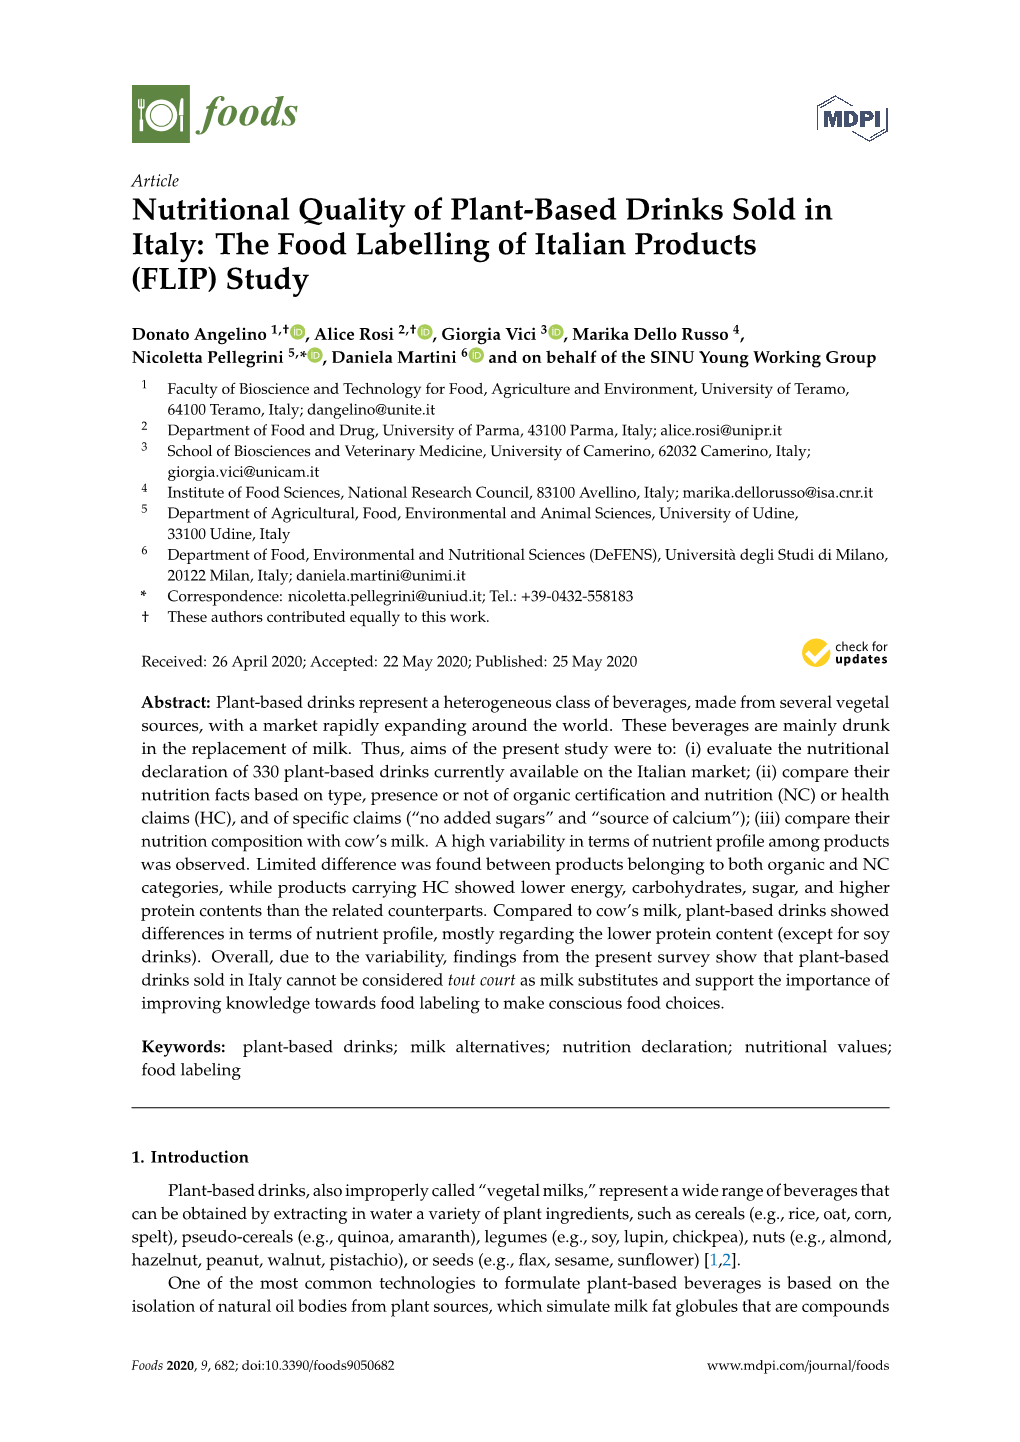 Nutritional Quality of Plant-Based Drinks Sold in Italy: the Food Labelling of Italian Products (FLIP) Study